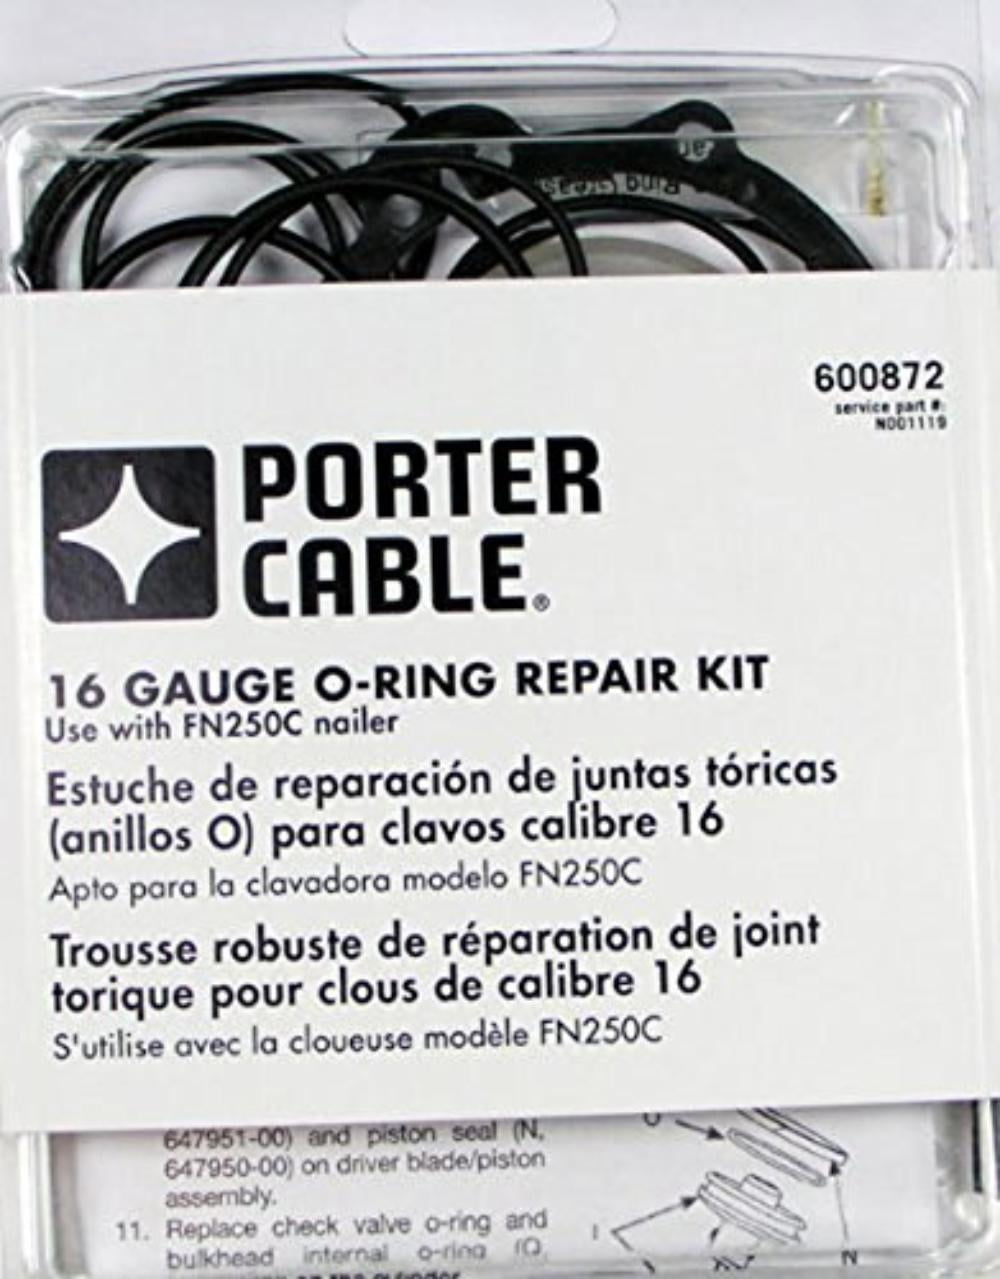 Porter Cable Genuine OEM Replacement O-Ring Kit # N001119 